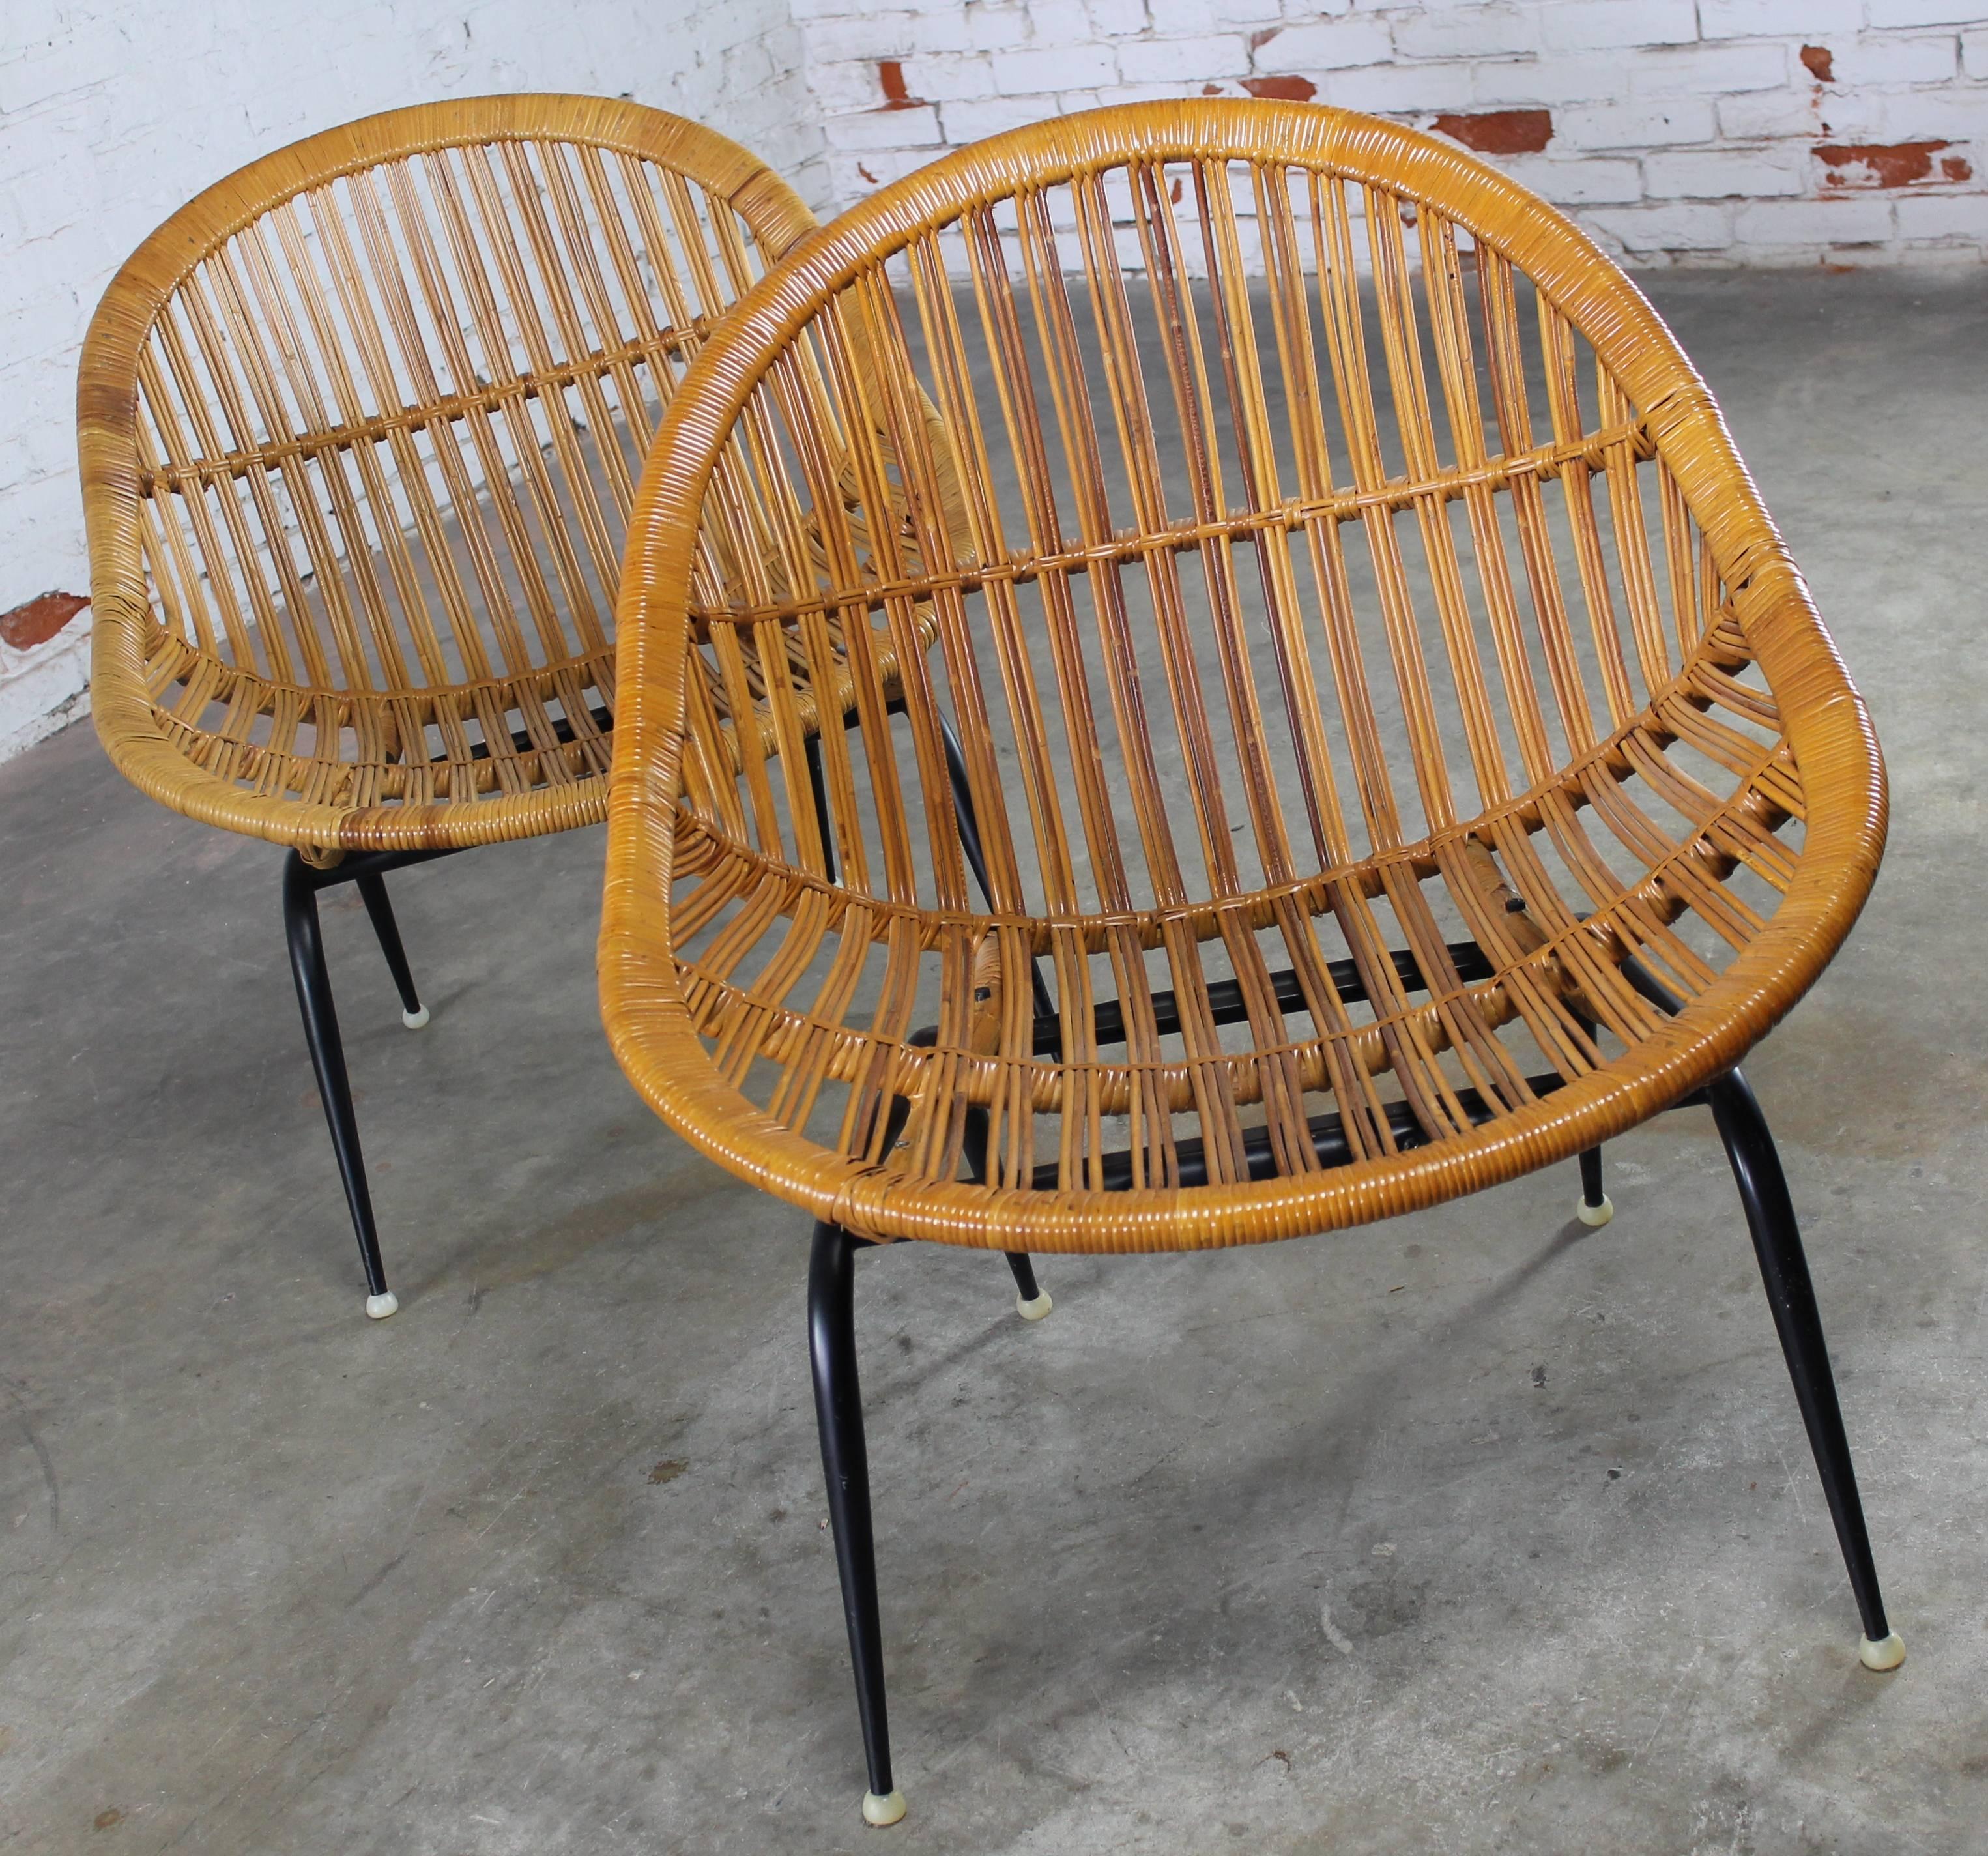 Incredible pair of Troy Sunshade Company, circa 1950 wicker rattan basket chairs. This pair is in very good condition.

What a find and particularly in such good condition! This pair of Mid-Century Modern rattan or wicker basket chairs are by the